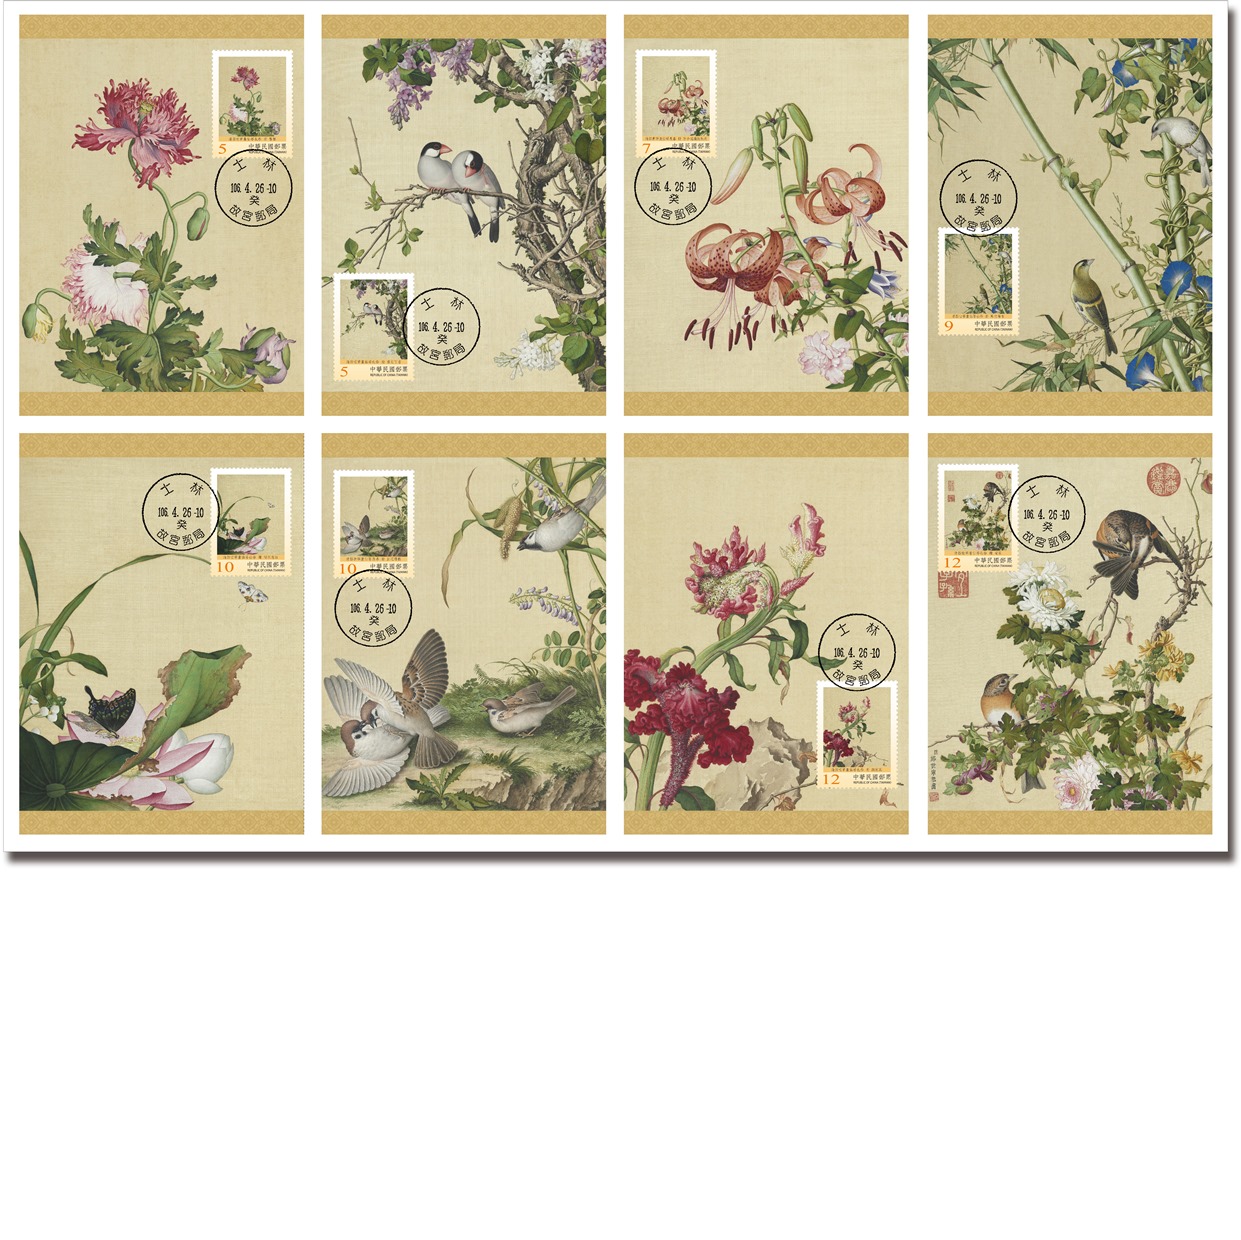 Ancient Chinese Paintings from the National Palace Museum Postage Stamps: Immortal Blossoms of an Eternal Spring (II)Ancient Chinese Paintings from the National Palace Museum Postage Stamps (Issue of 2016) Pre-canclled Maximum cards 